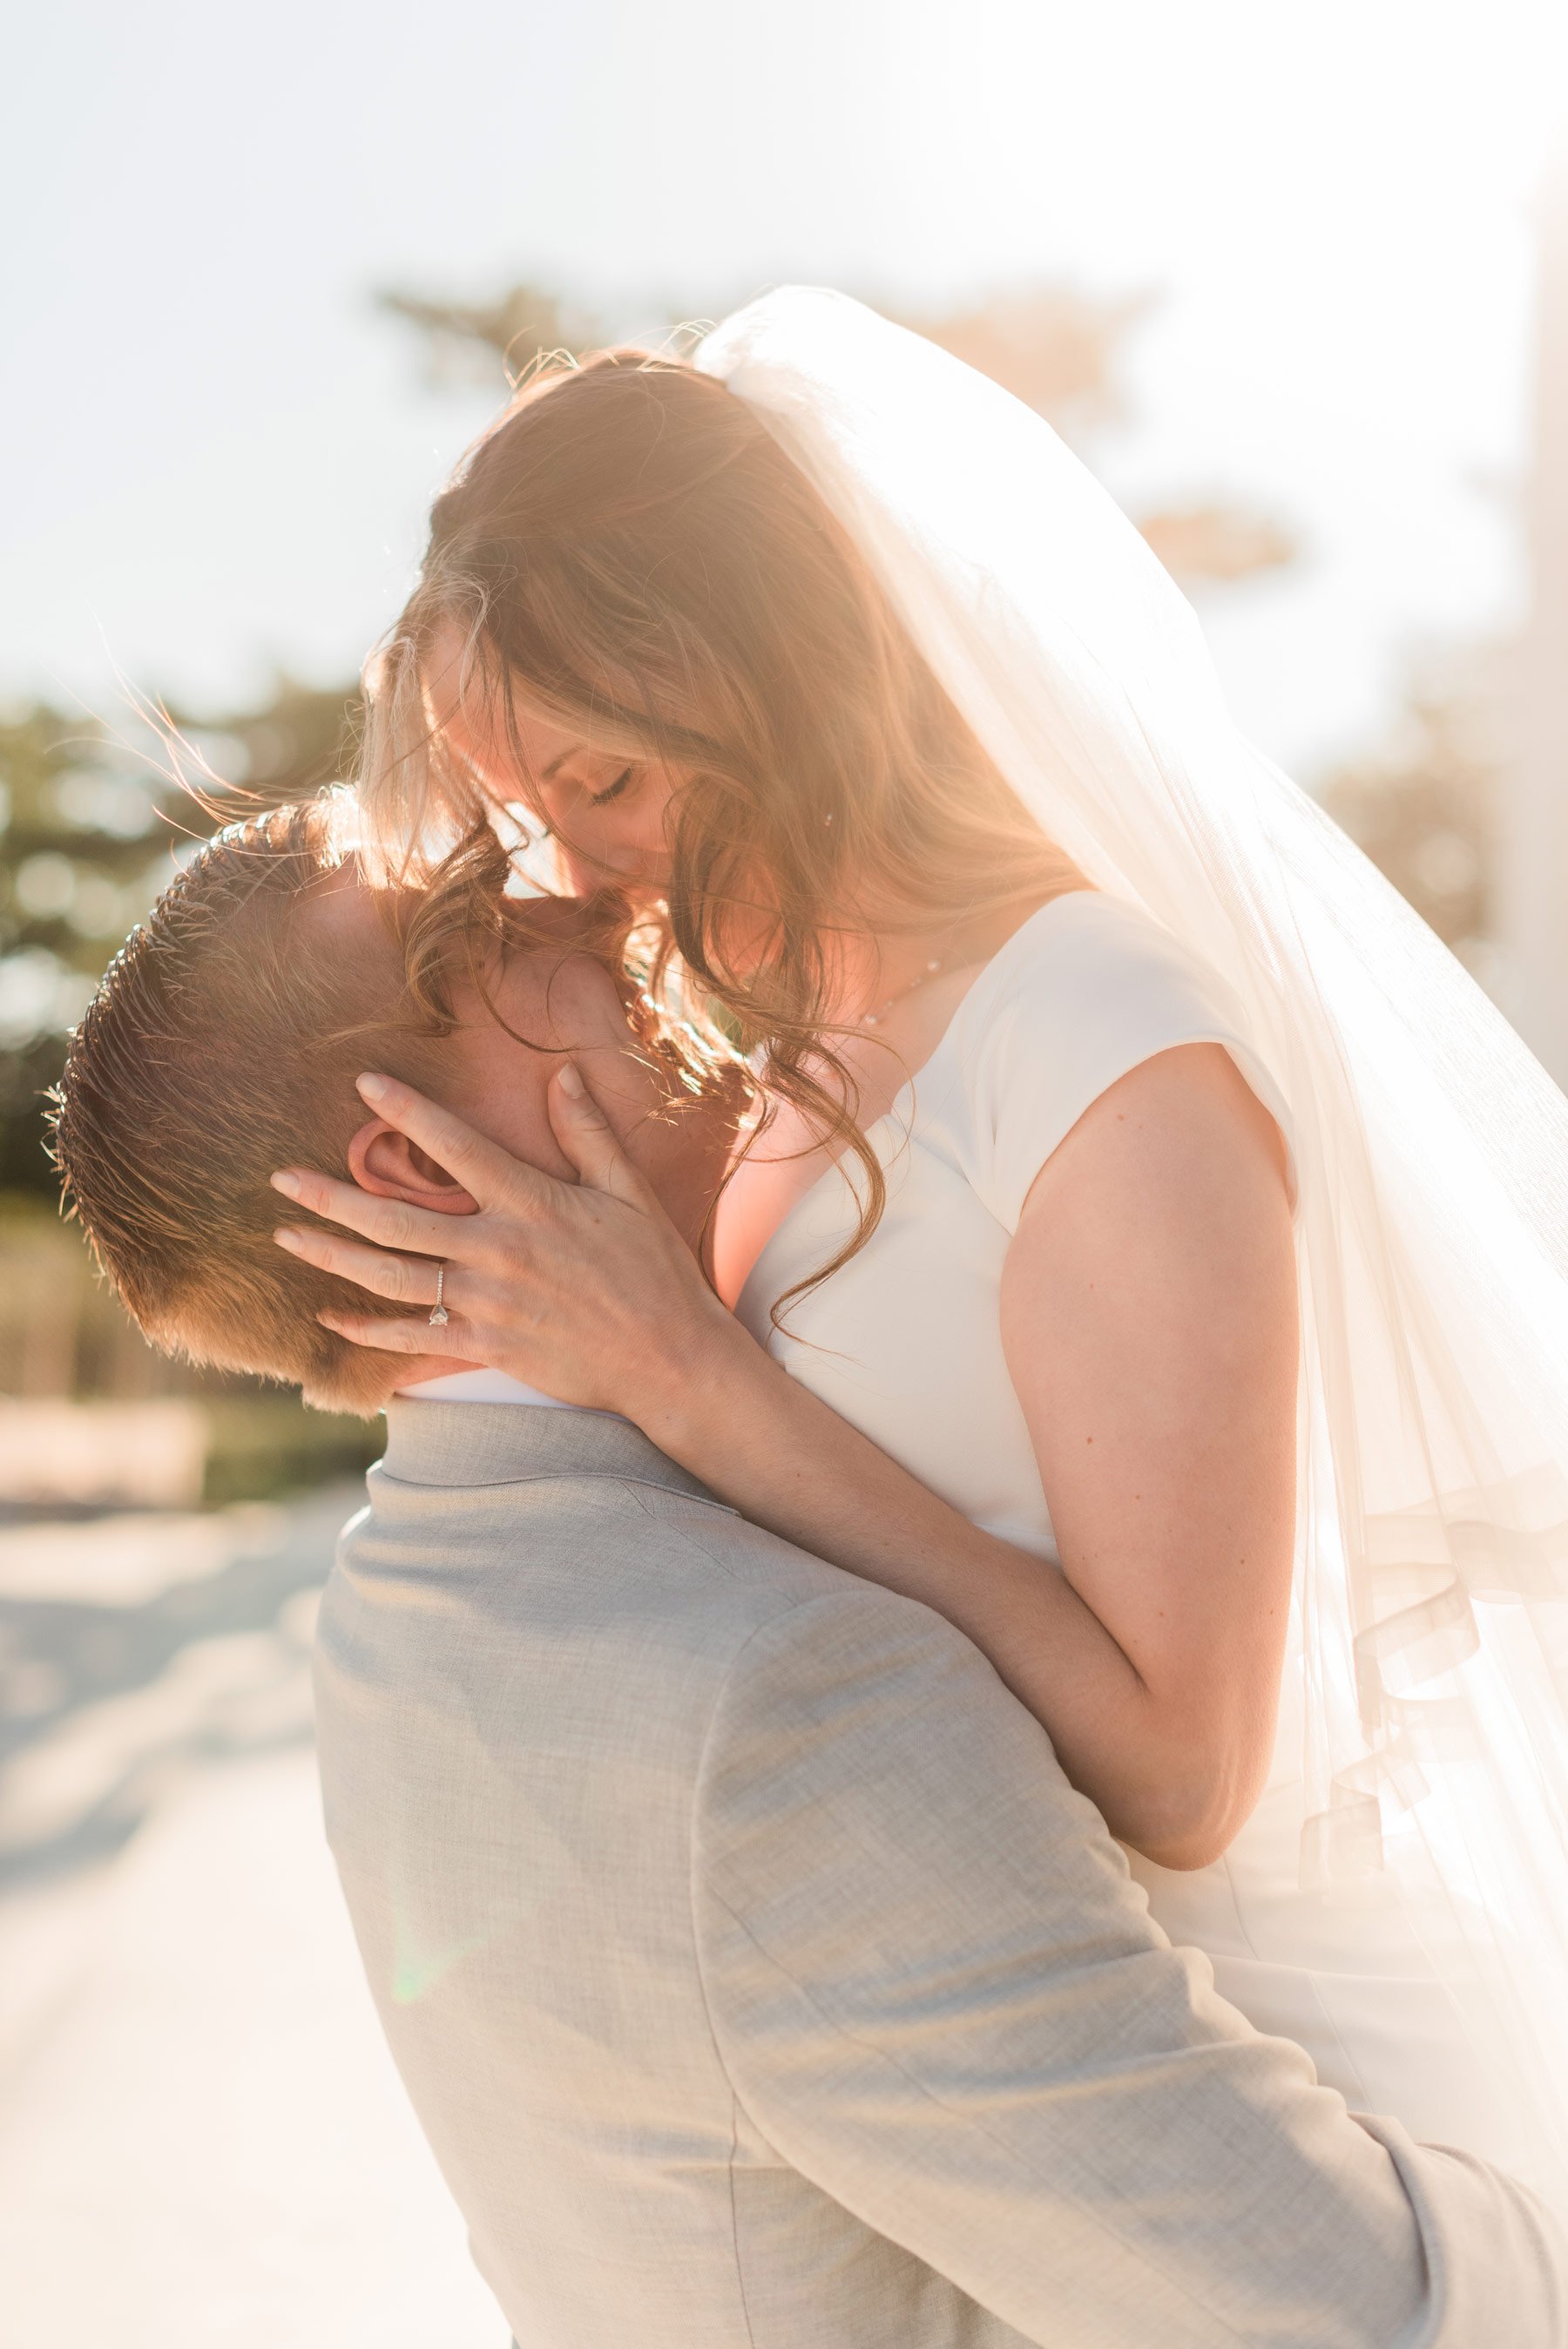    A romantic wedding photo of the bride and groom nearly kissing in the golden hour light. #washingtondcphotography #washingtondctemple #washingtondcwedding #dcweddingphotographer #washingtondctemplewedding #eastcoastweddingphotographer #sunsetbrida